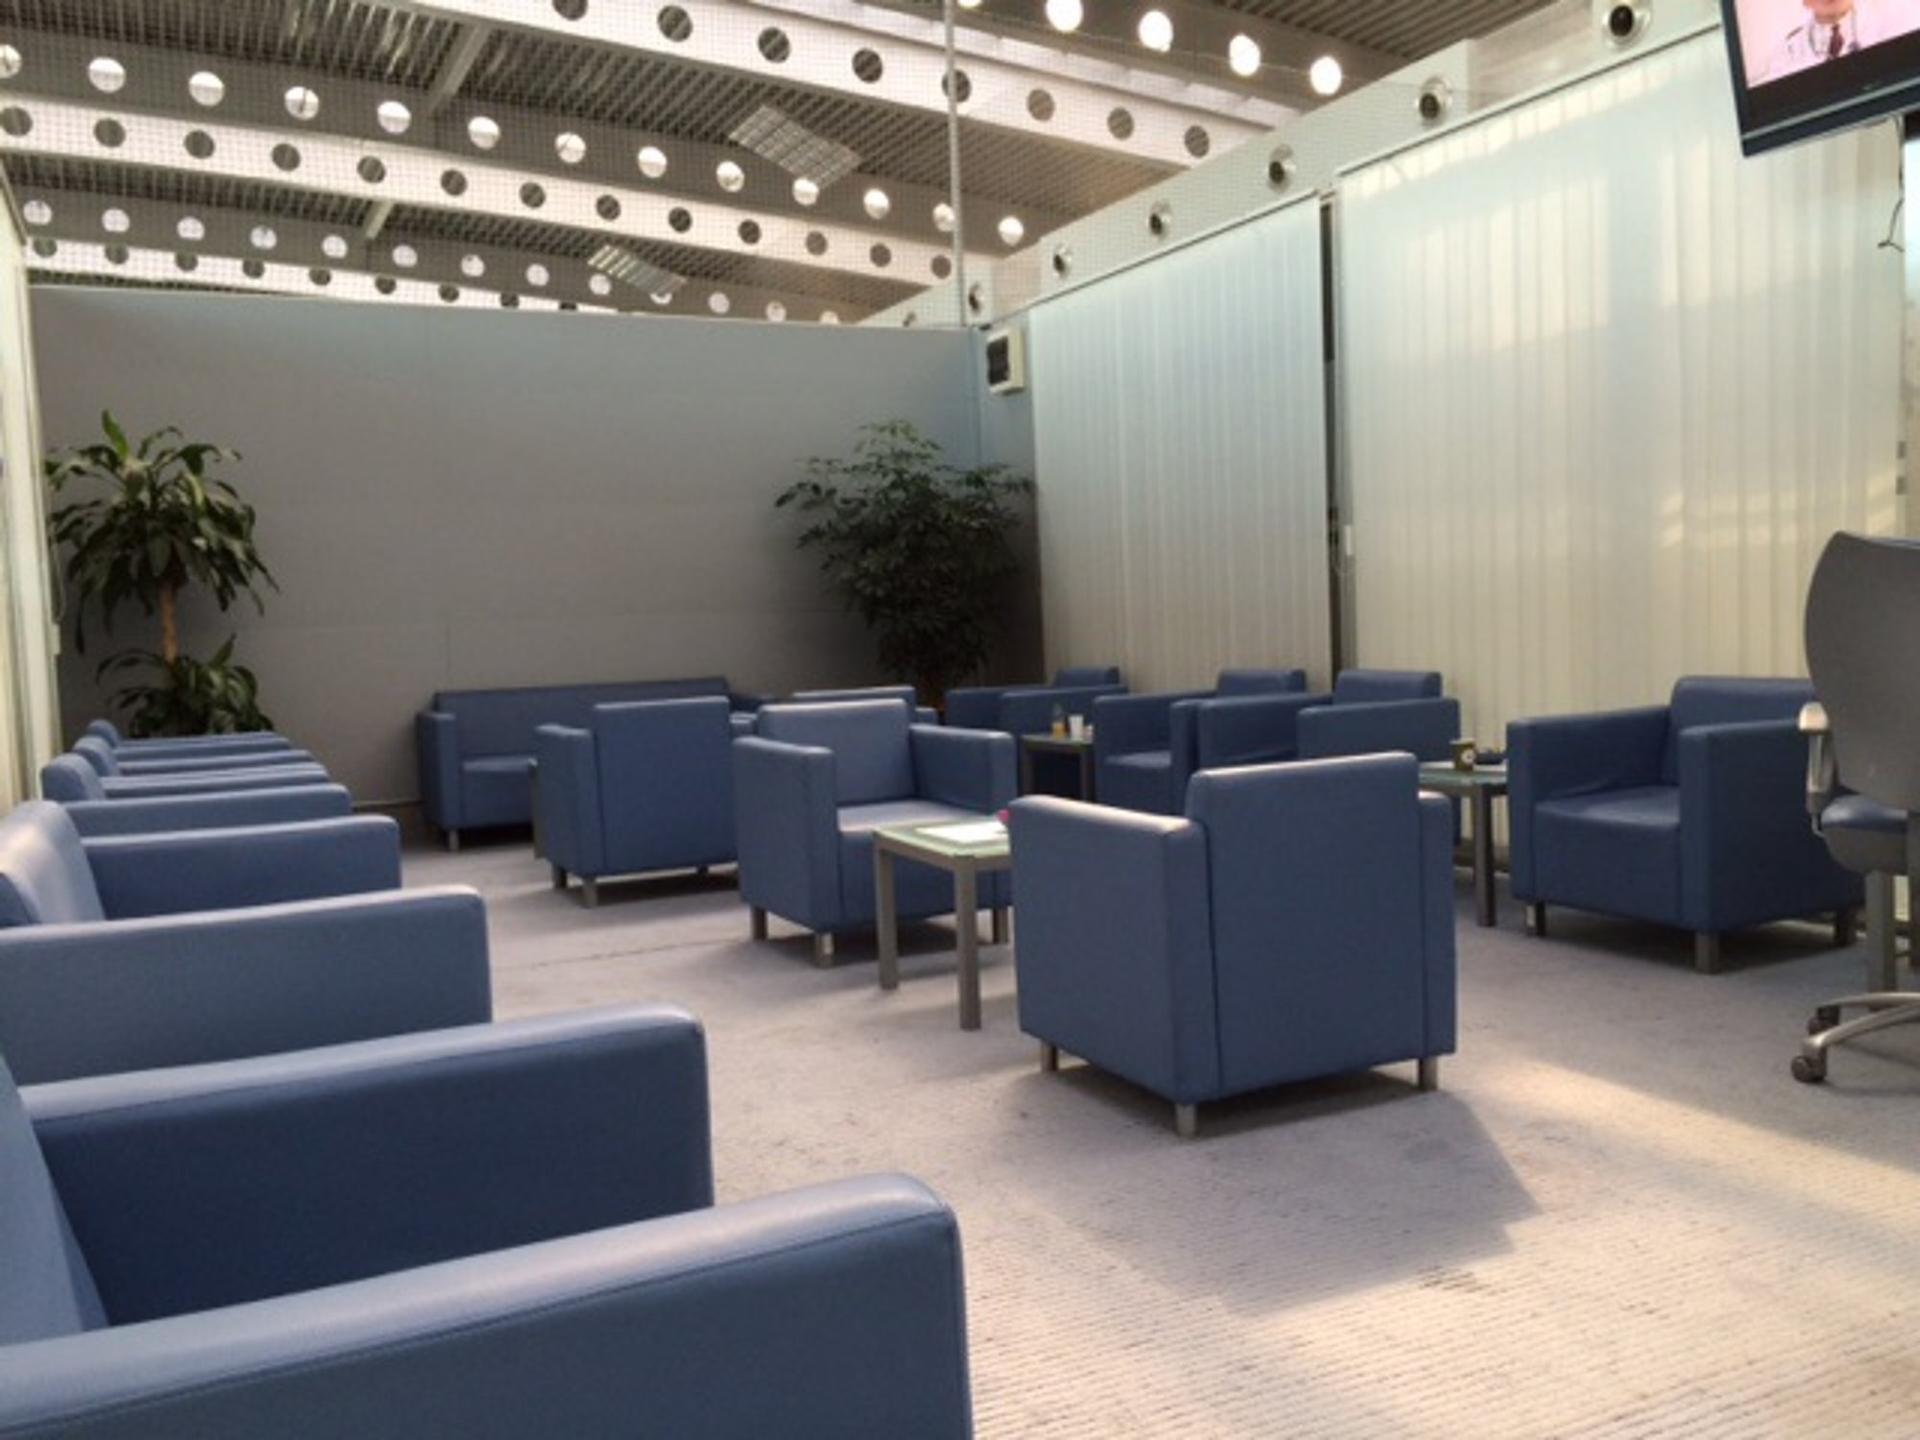 Airport Business Lounge image 2 of 7